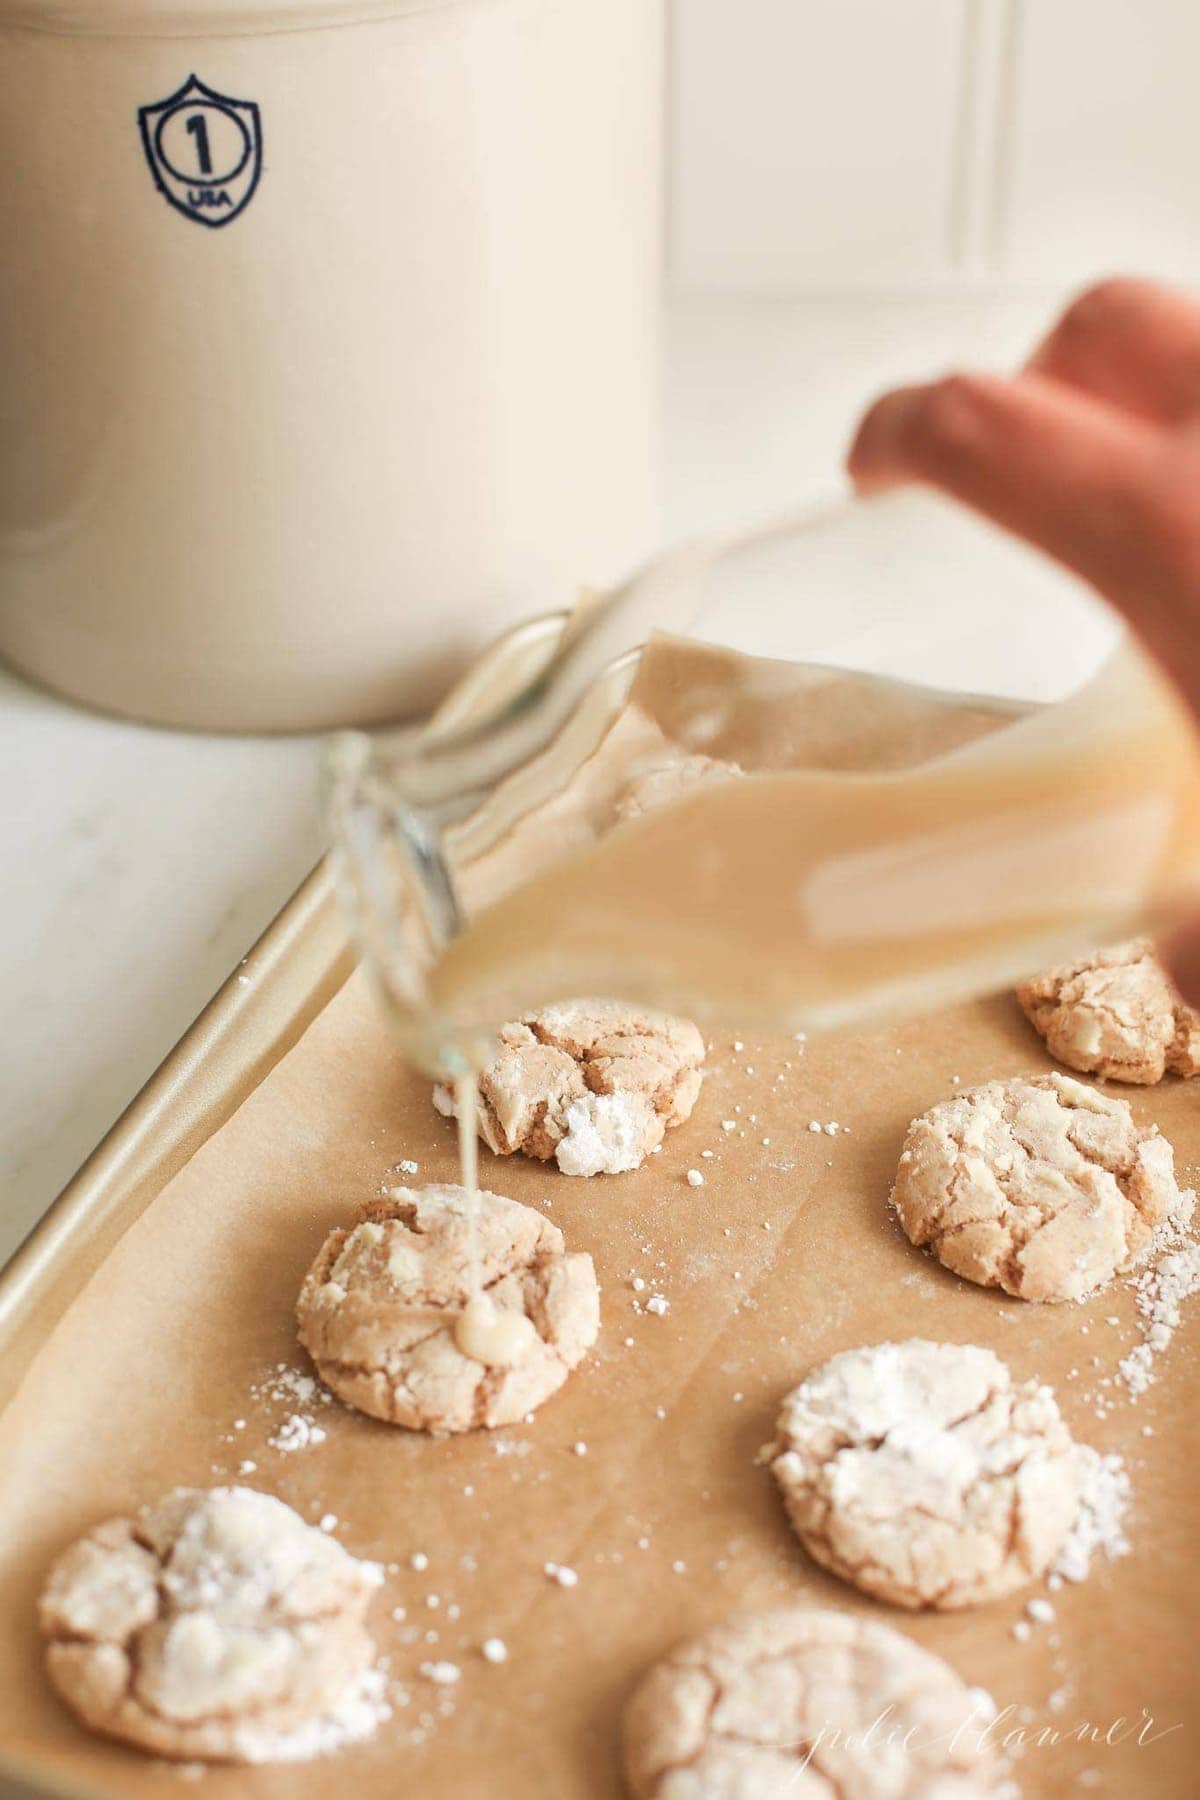 Glaze being poured over the cookies